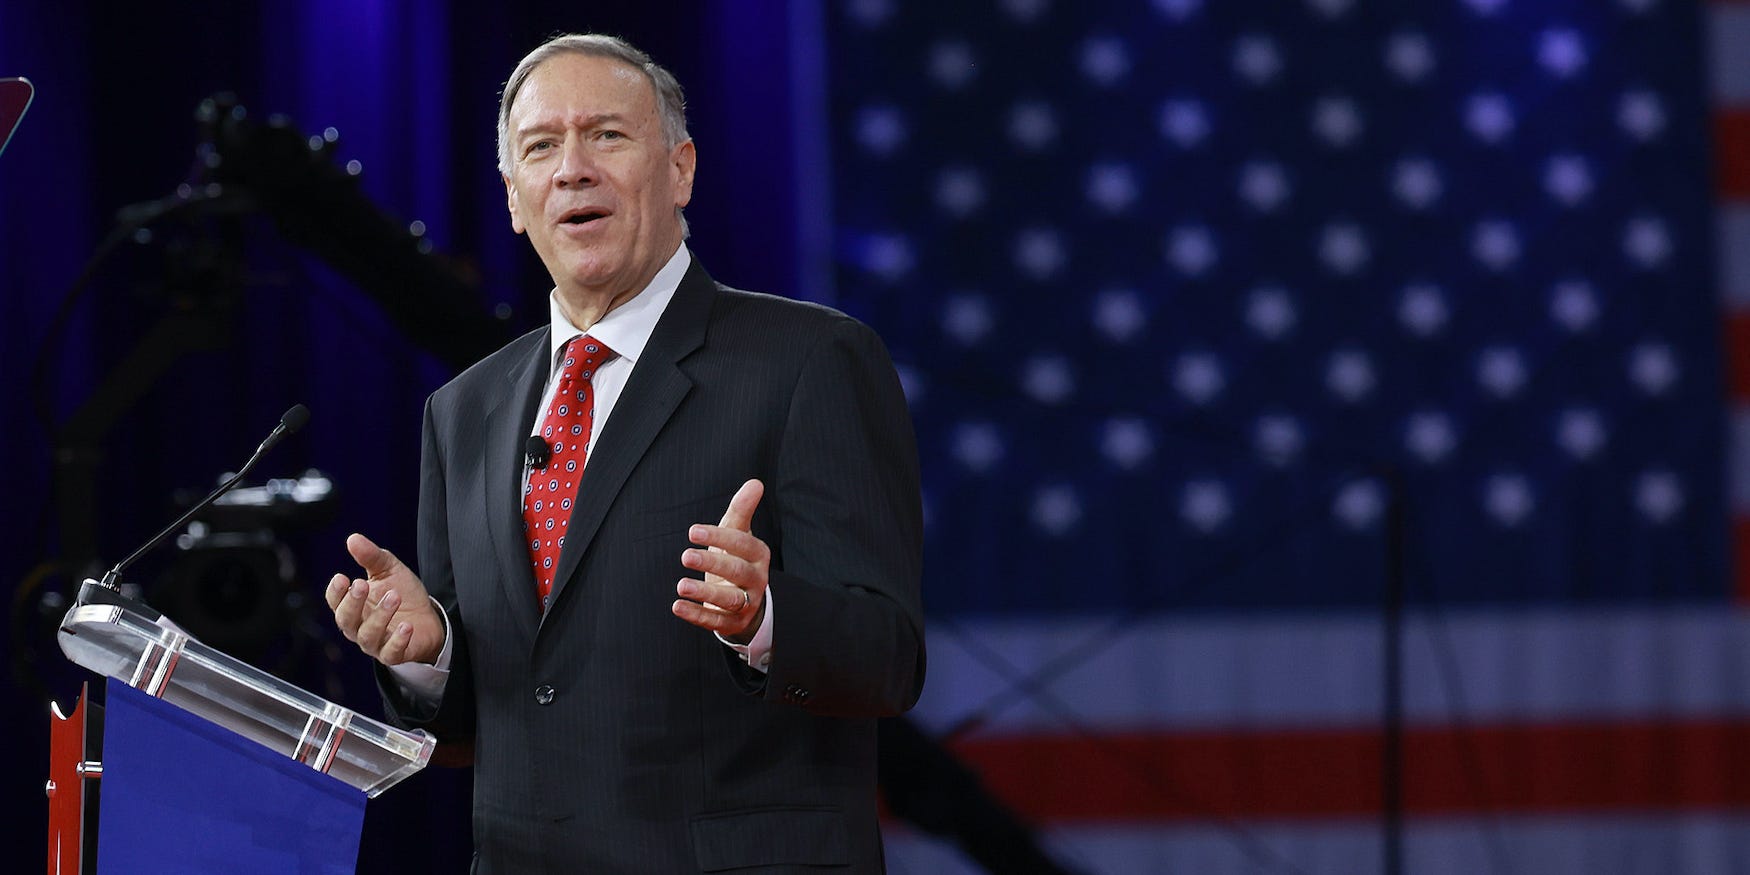 Mike Pompeo gestures off to his left side at CPAC 2022.